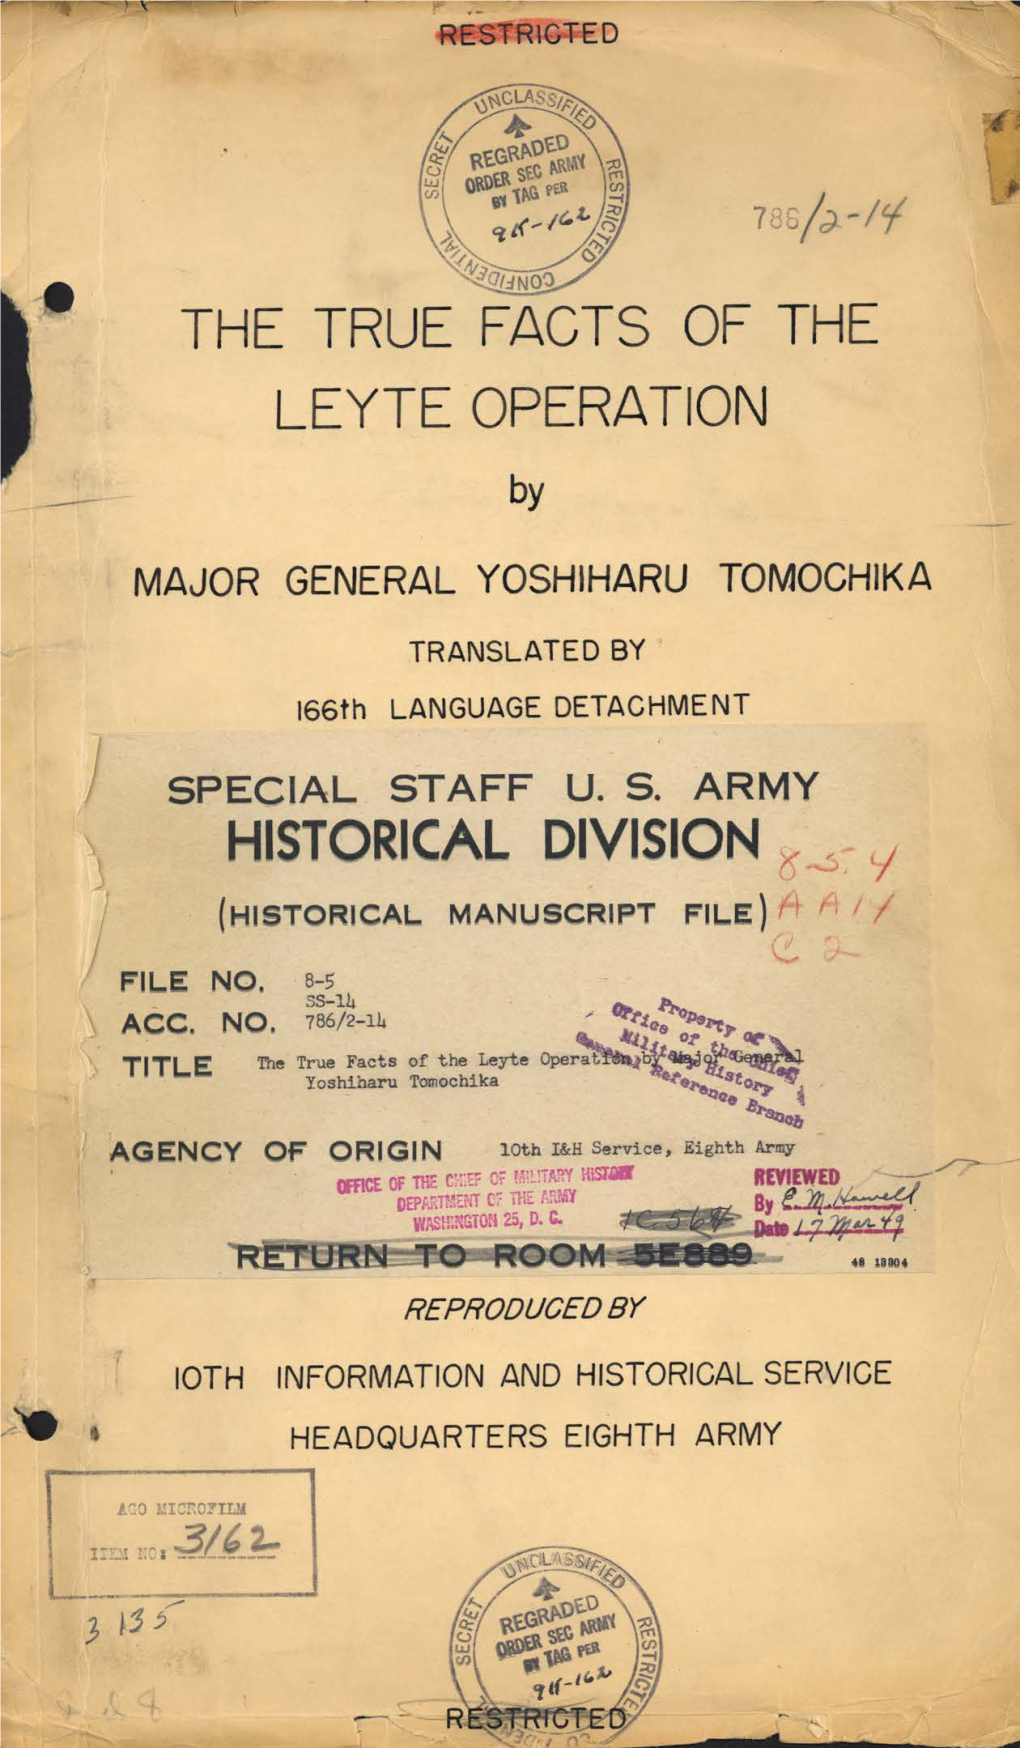 The True Facts of the Leyte Operation